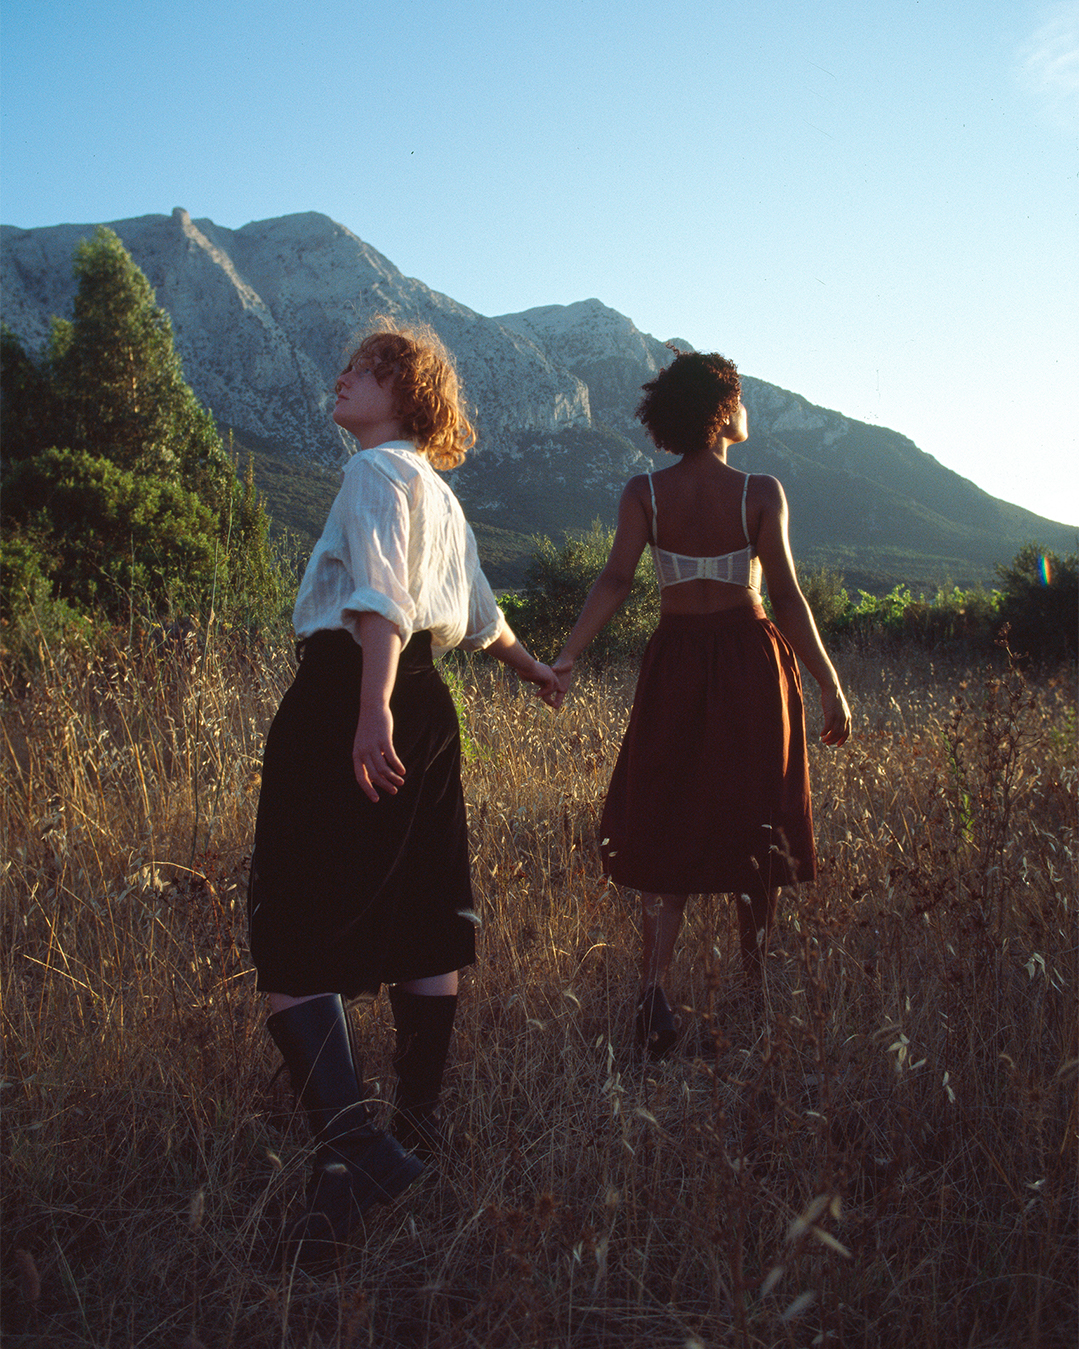 Flo Verhulst - photo of two people holding hands in a sunny wheat field with a mountain in the background. One is ginger and wears a white shirt with black skirt, the other has dark, curly har, a brown skirt and a white bra